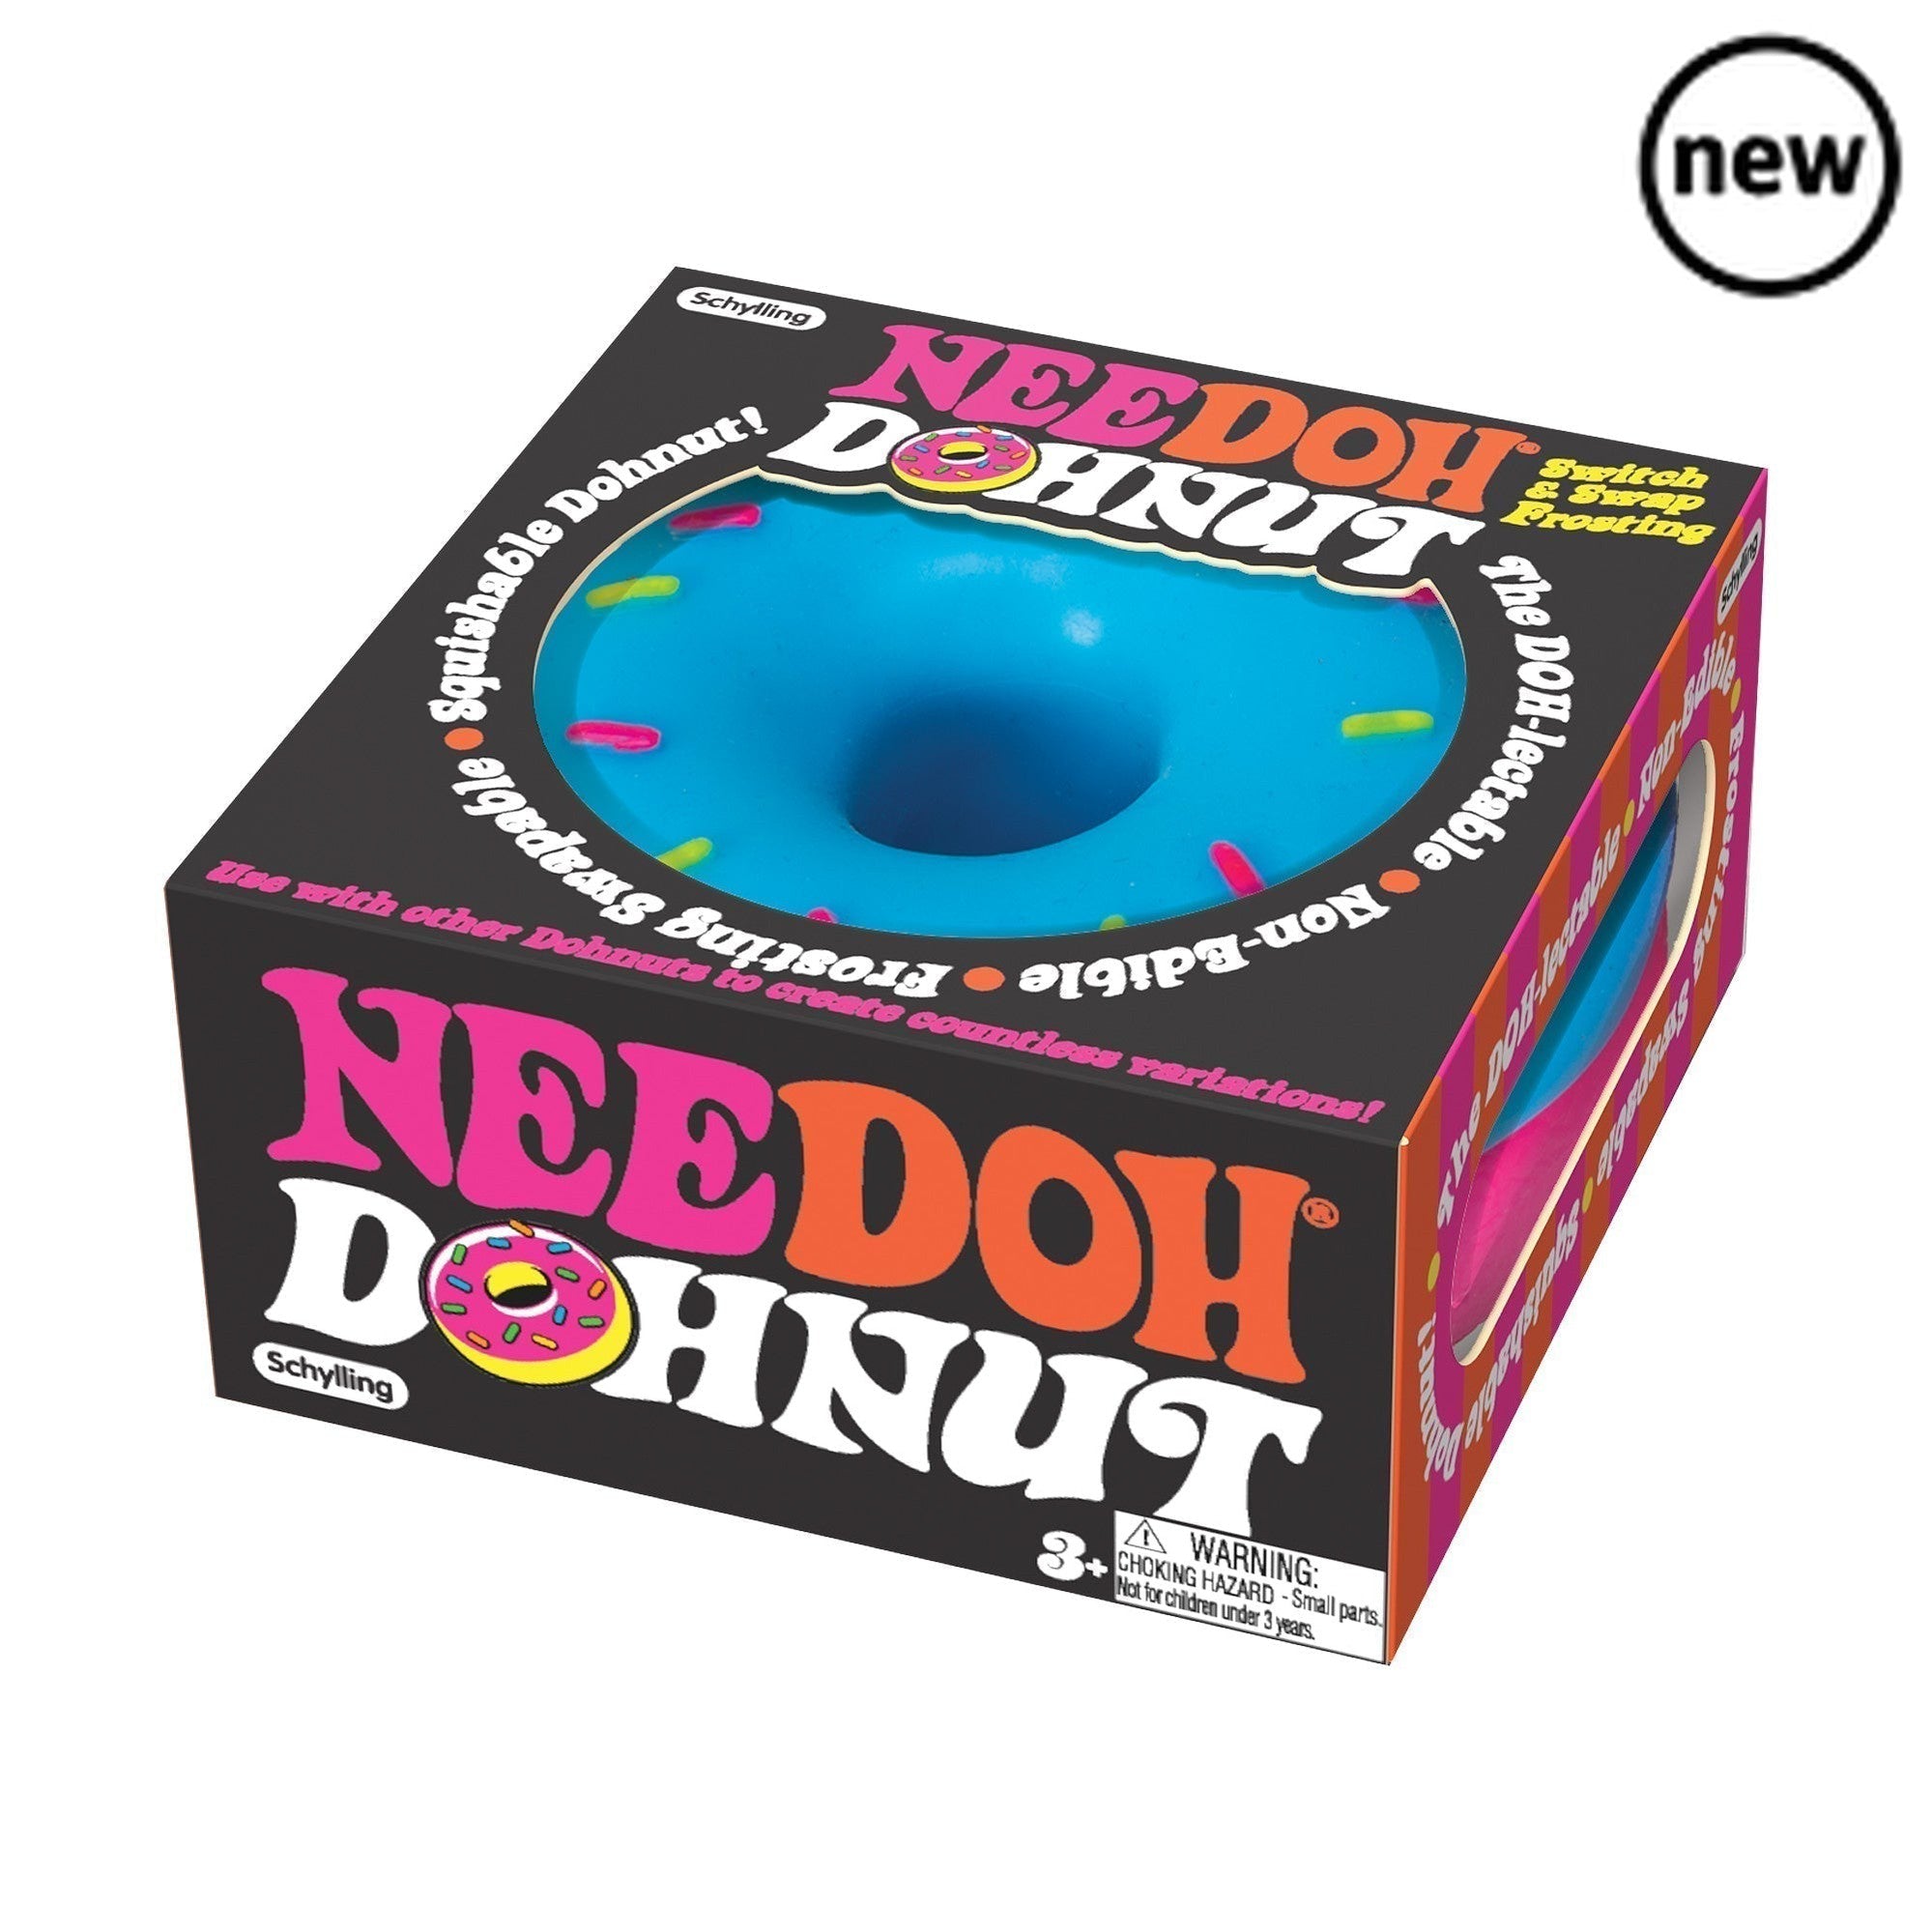 NeeDoh Donut, We ‘donut’ believe how cute this fidget toy is! NeeDoh Dohnuts are super sweet stress balls that almost looks good enough to eat (please note they are not edible). Comes in assorted colours (picked at random). Filled with a non-toxic dough material, squeeze stresses away. With swappable frosting, customise your Dohnut to make fun combinations. Squish it, stretch it and squash it for lots of NeeDoh ball fun. NeeDoh Donuts are great fidget toys, particularly appropriate for those with ADD, ADHD,